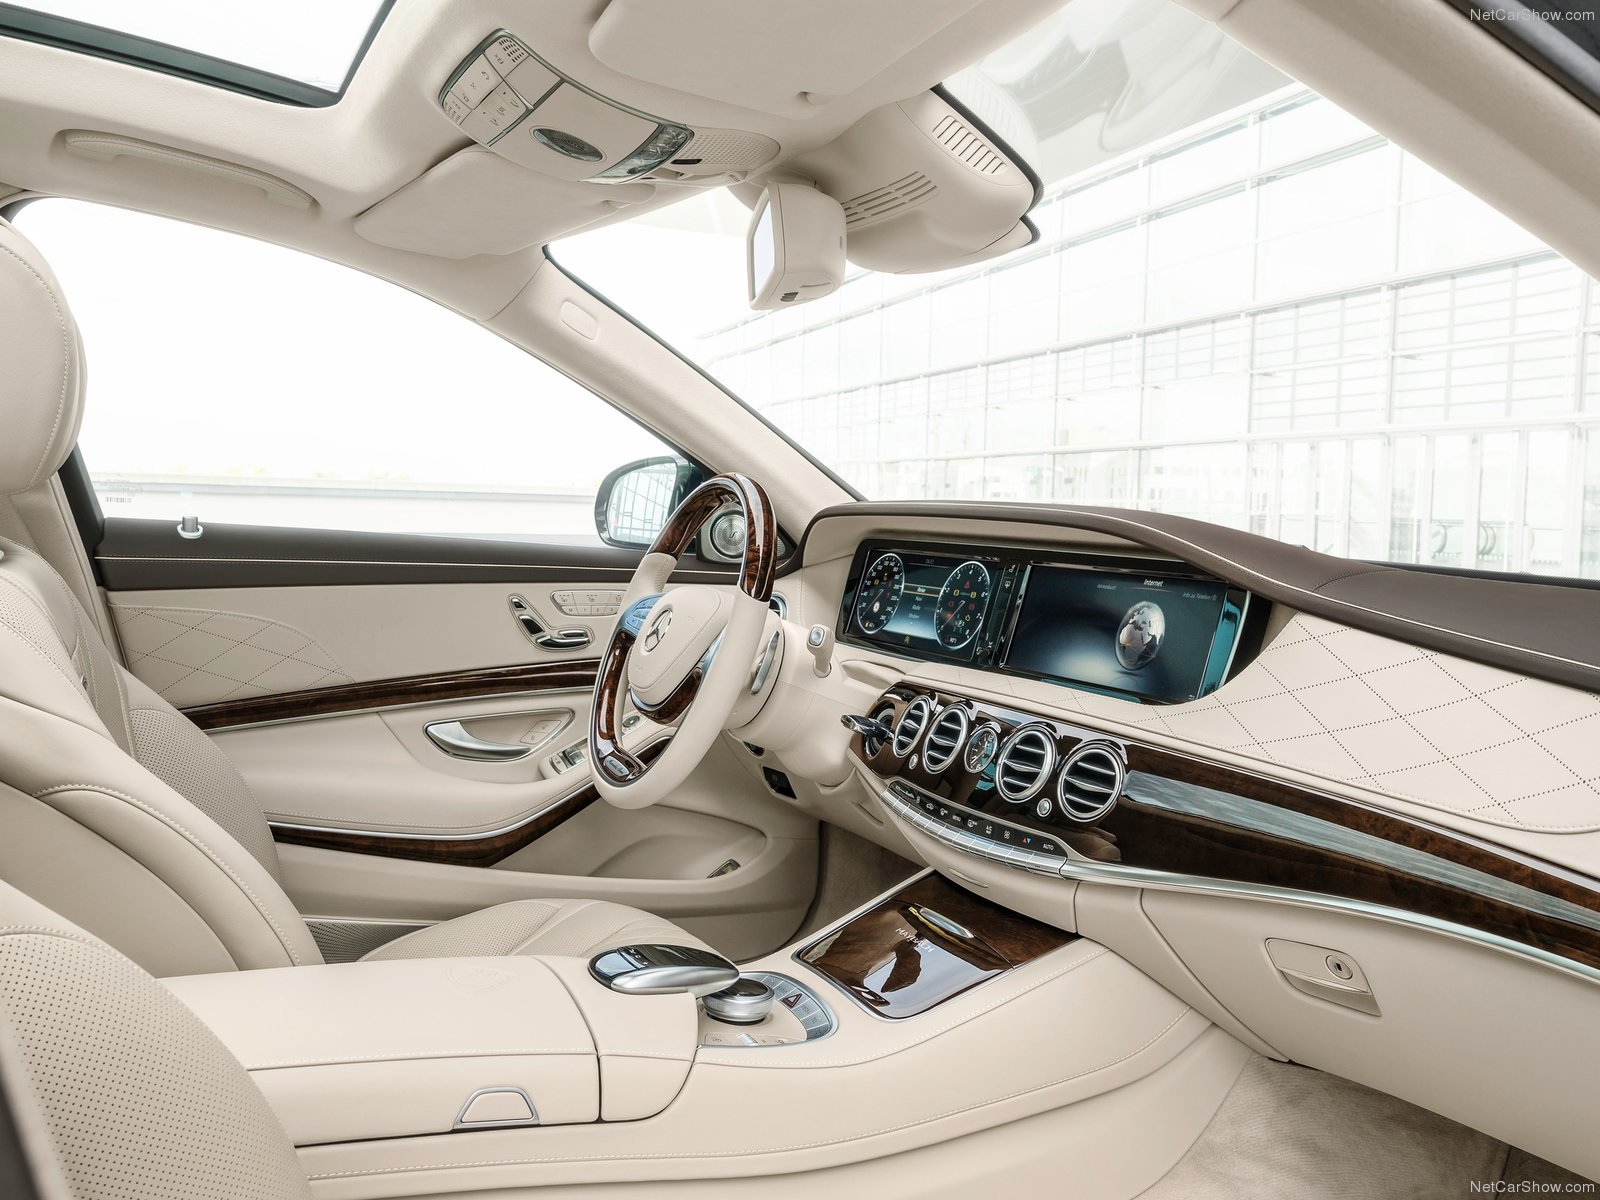 2015, Mercedes, Benz, S class, Maybach, Luxury, Supercars, Cars, Black Wallpaper